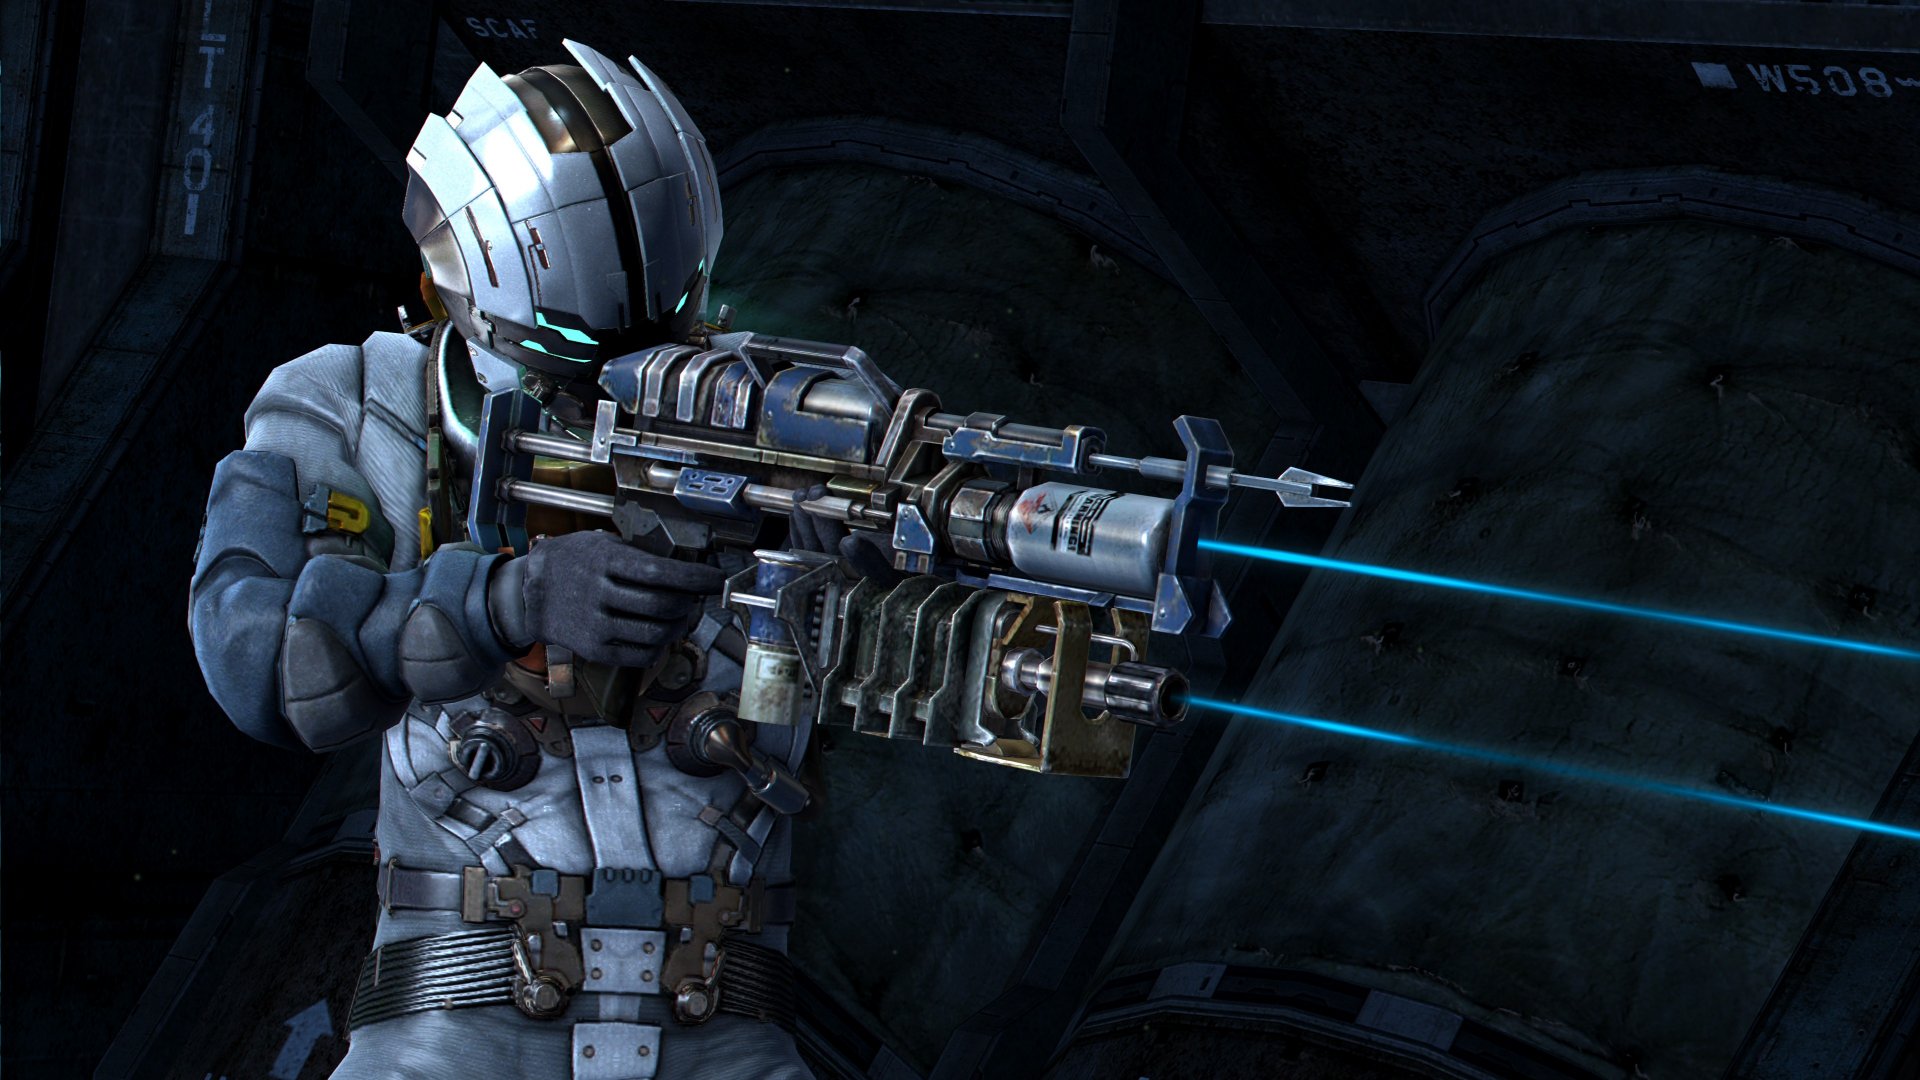 dead space 3 weapons testing arena how to get